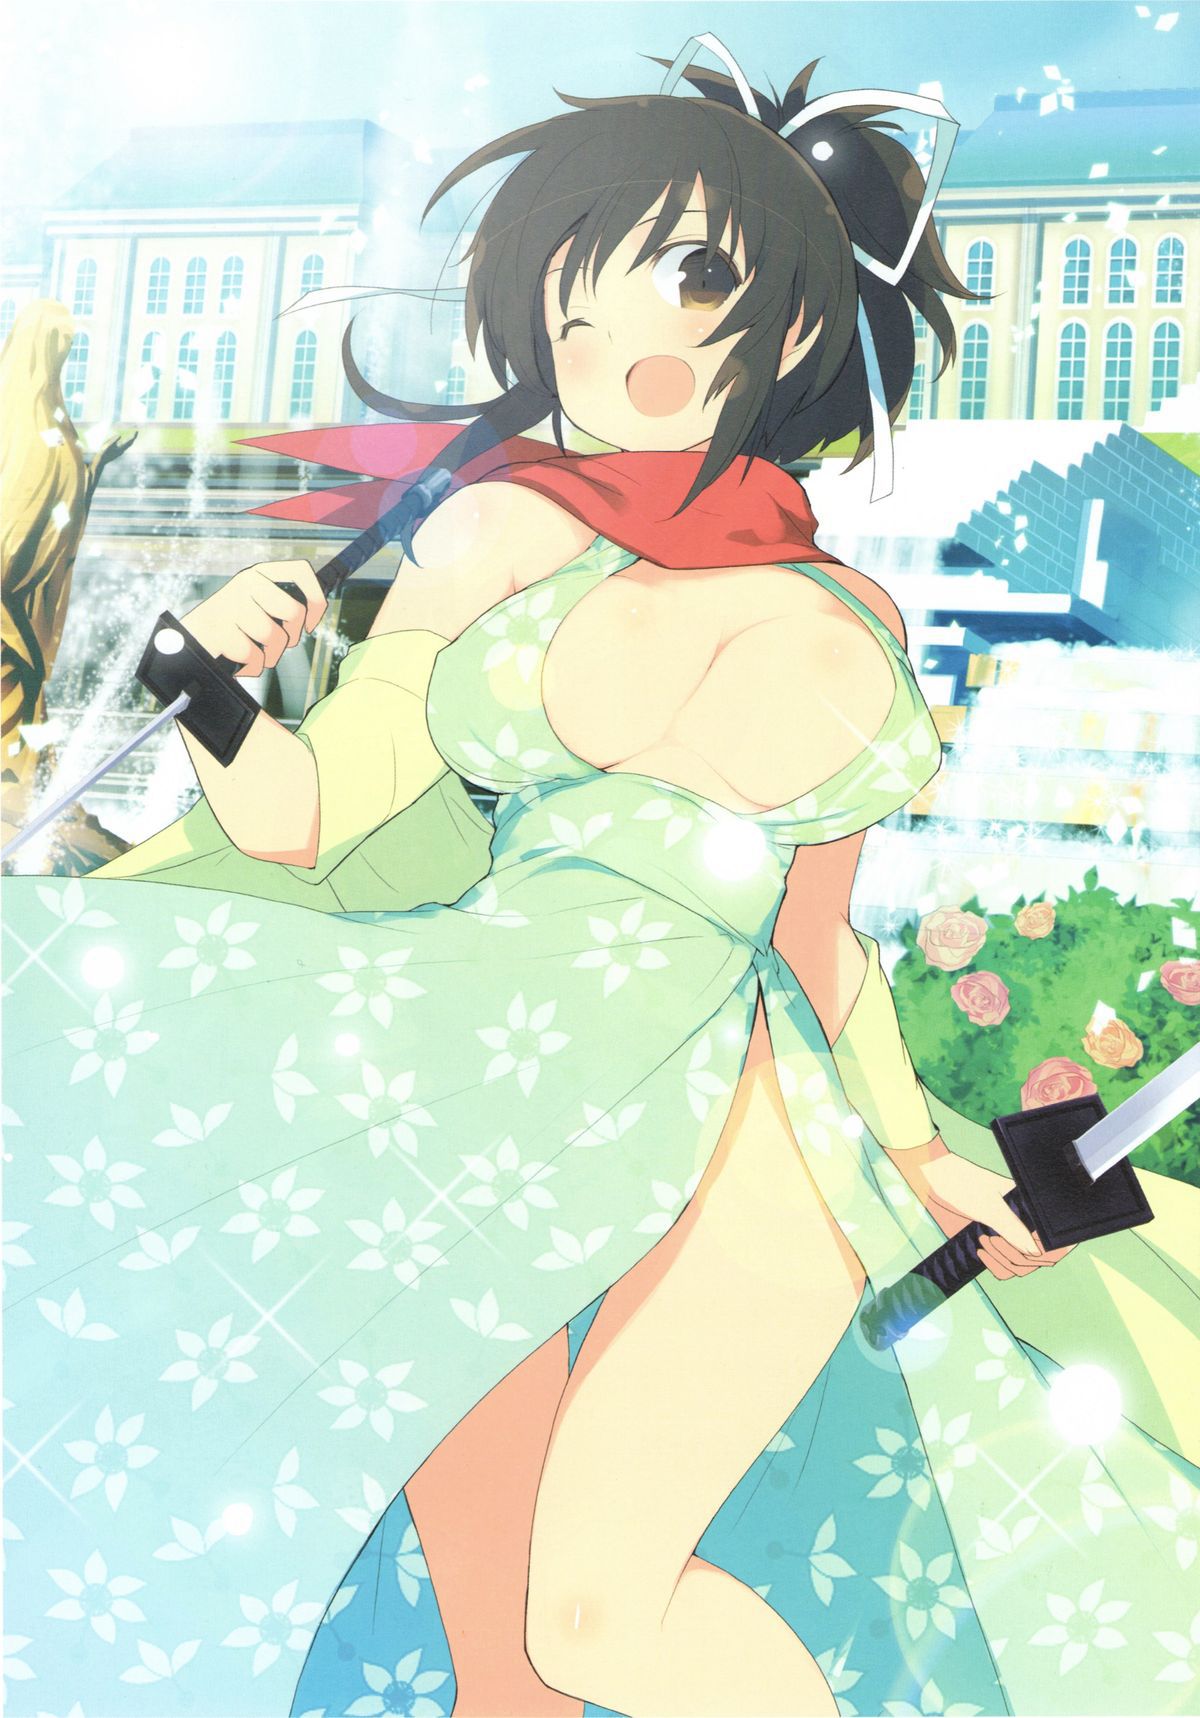 Thread to complete an image of 閃乱 カグラ which I collected so far 14